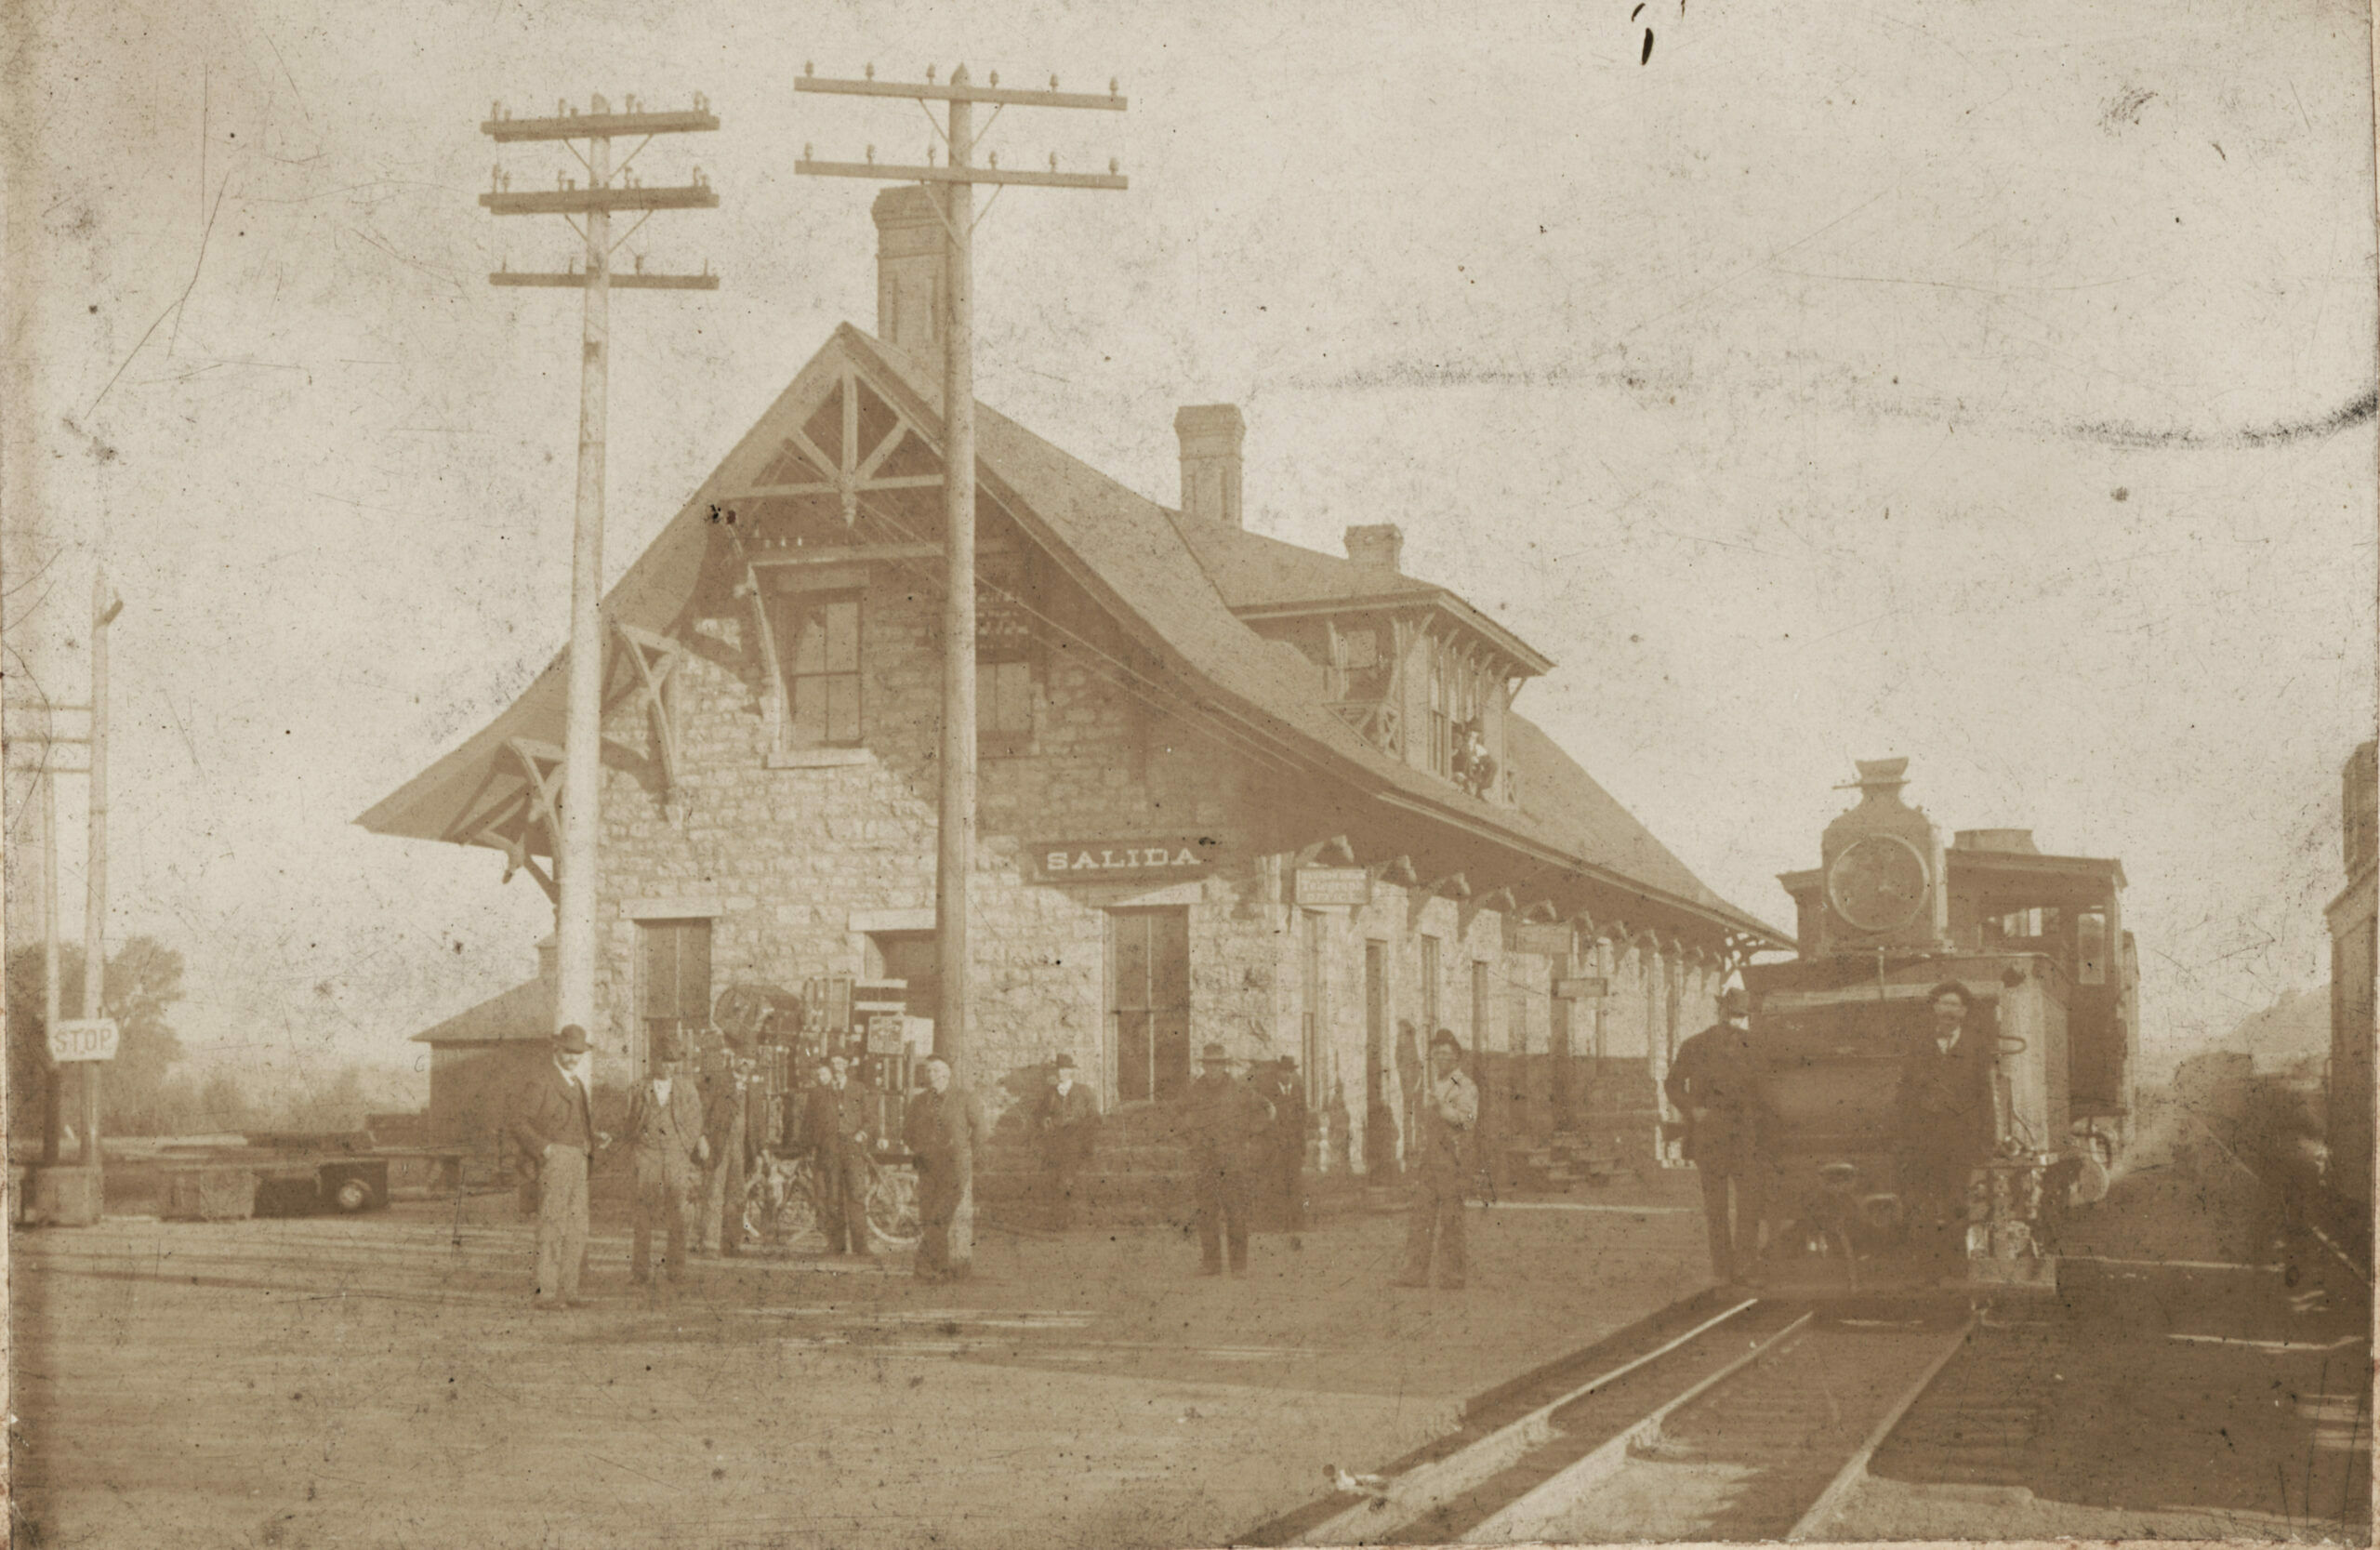 Although preparations began a year earlier, the third rail was laid through Salida during 1890. Addition of the outside rail allowed standard gauge as well as narrow gauge trains to operate over the entire Rio Grande system. Switches, frogs and rerailers – especially in the crowded Salida yards – were an engineering marvel. As late as 1890, the tender of this switcher is fitted with a kerosene work light.  (1)